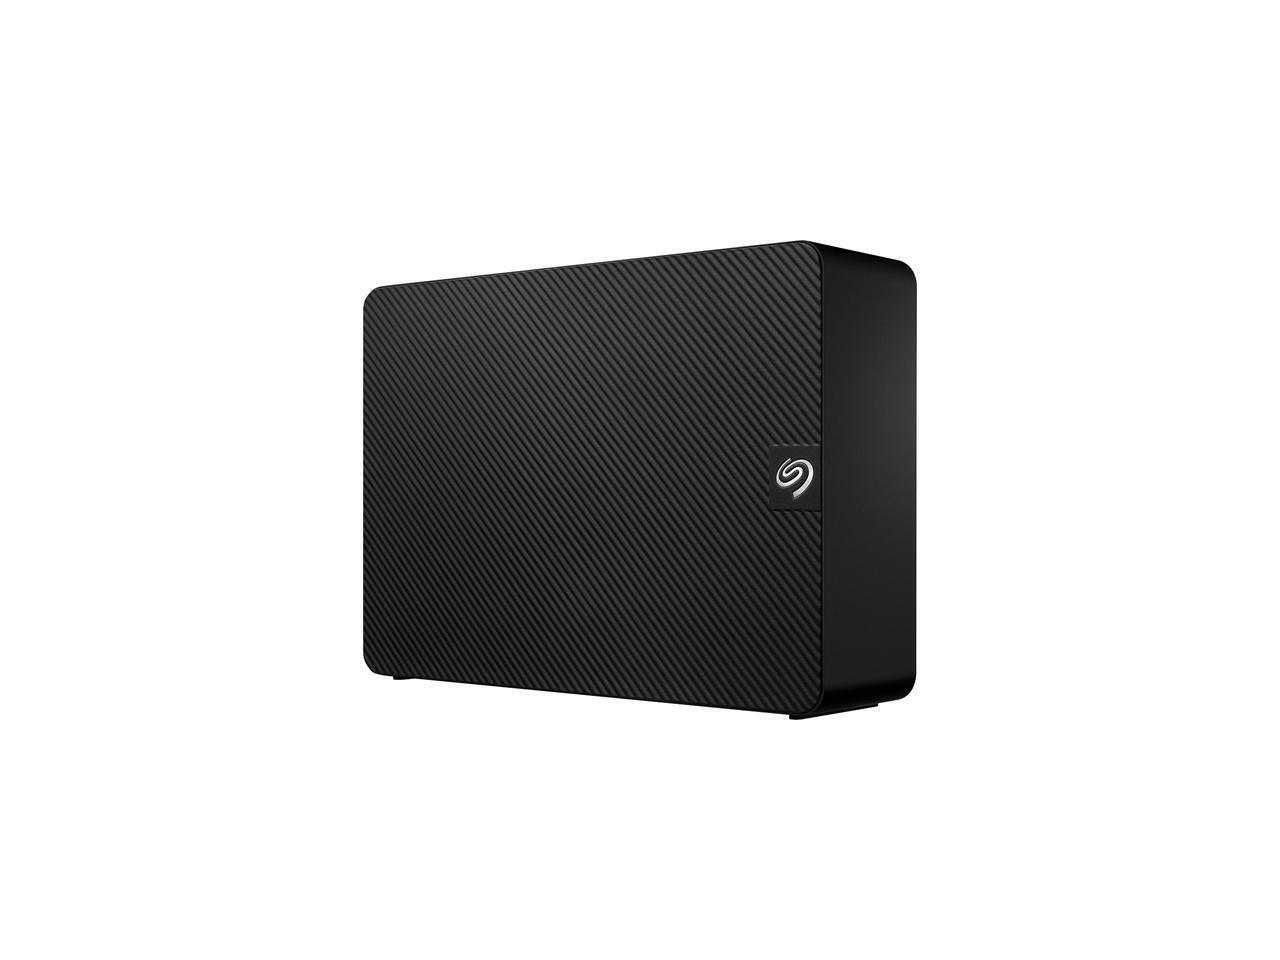 Seagate Expansion 18TB External Hard Drive HDD - USB 3.0, with Rescue Data Recov